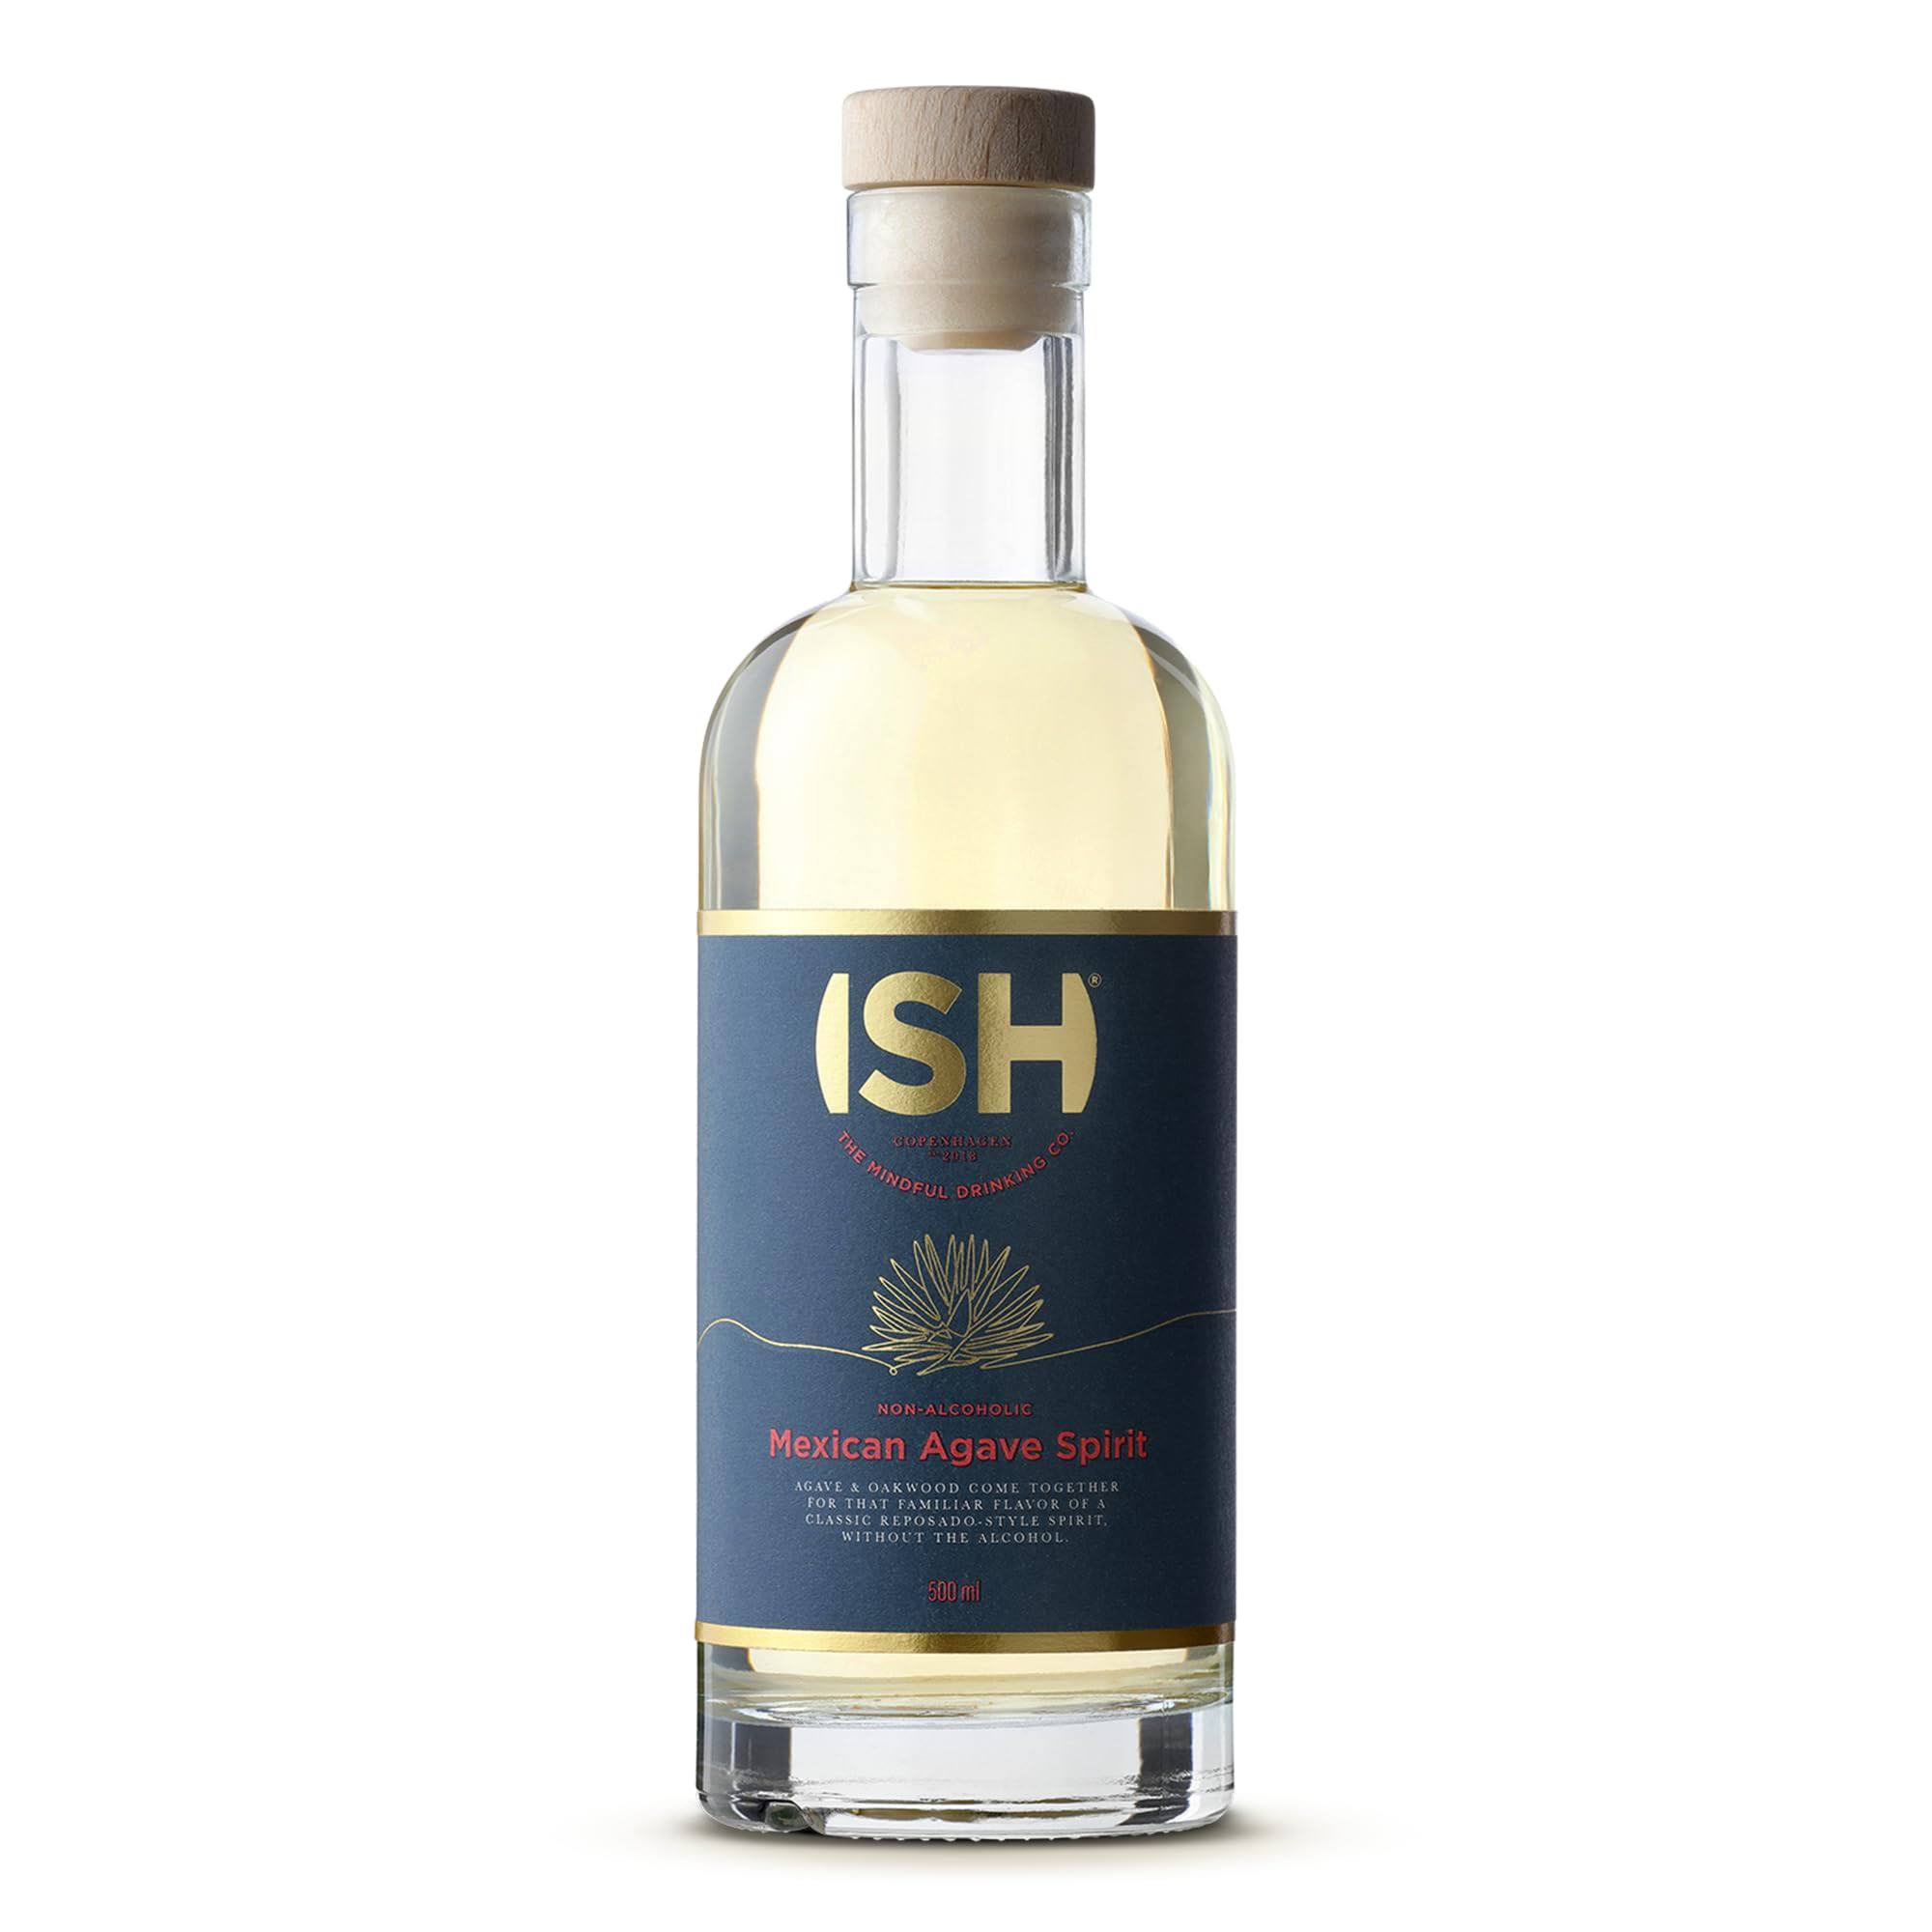 Ish - Mexican Agave Spirit - Non-Alcoholic Tequila - 500 ml